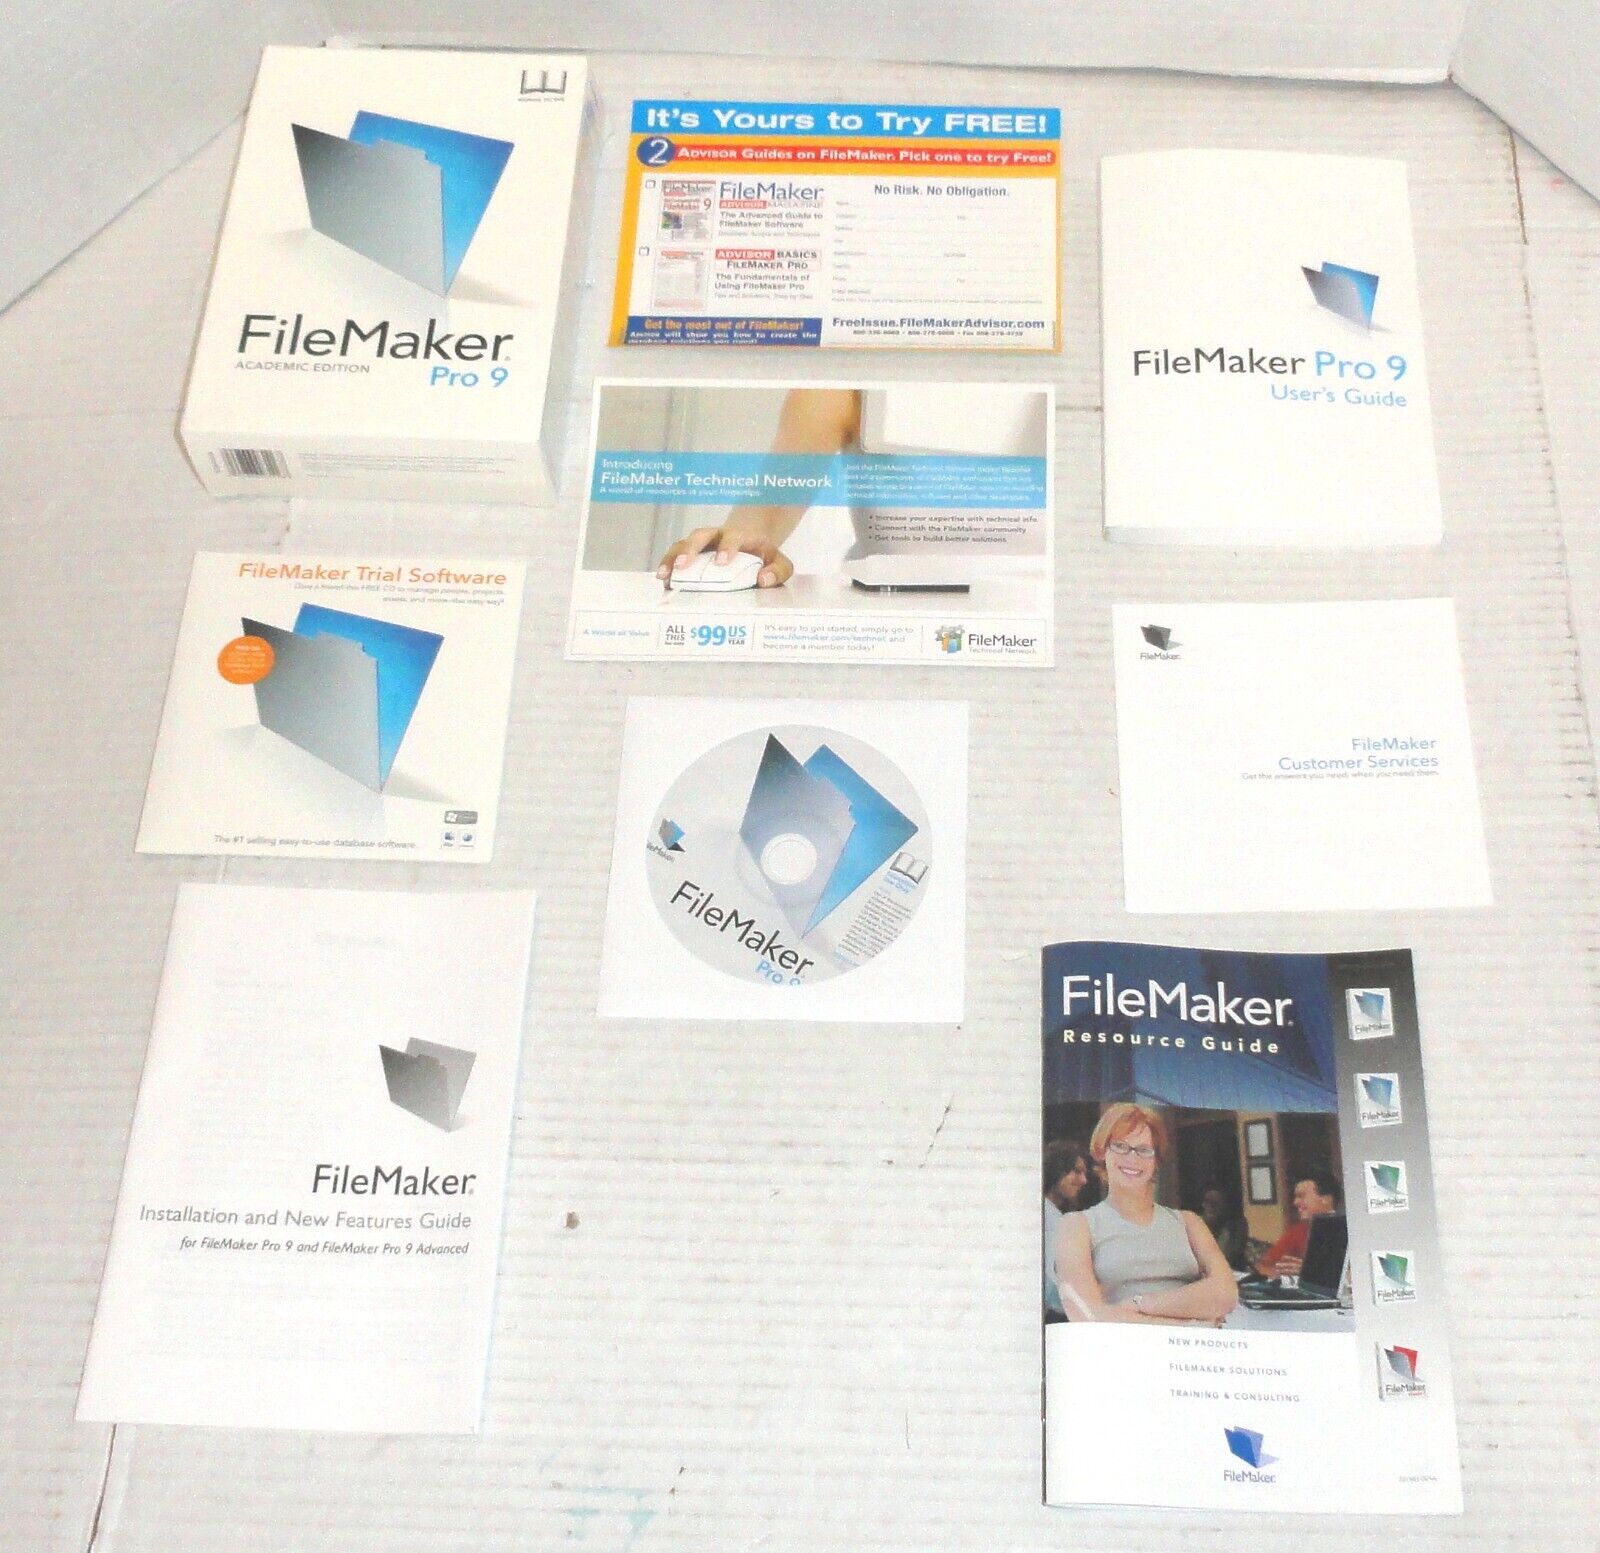 FileMaker Pro 9 Academic Edition English Version Software for Windows & Mac READ